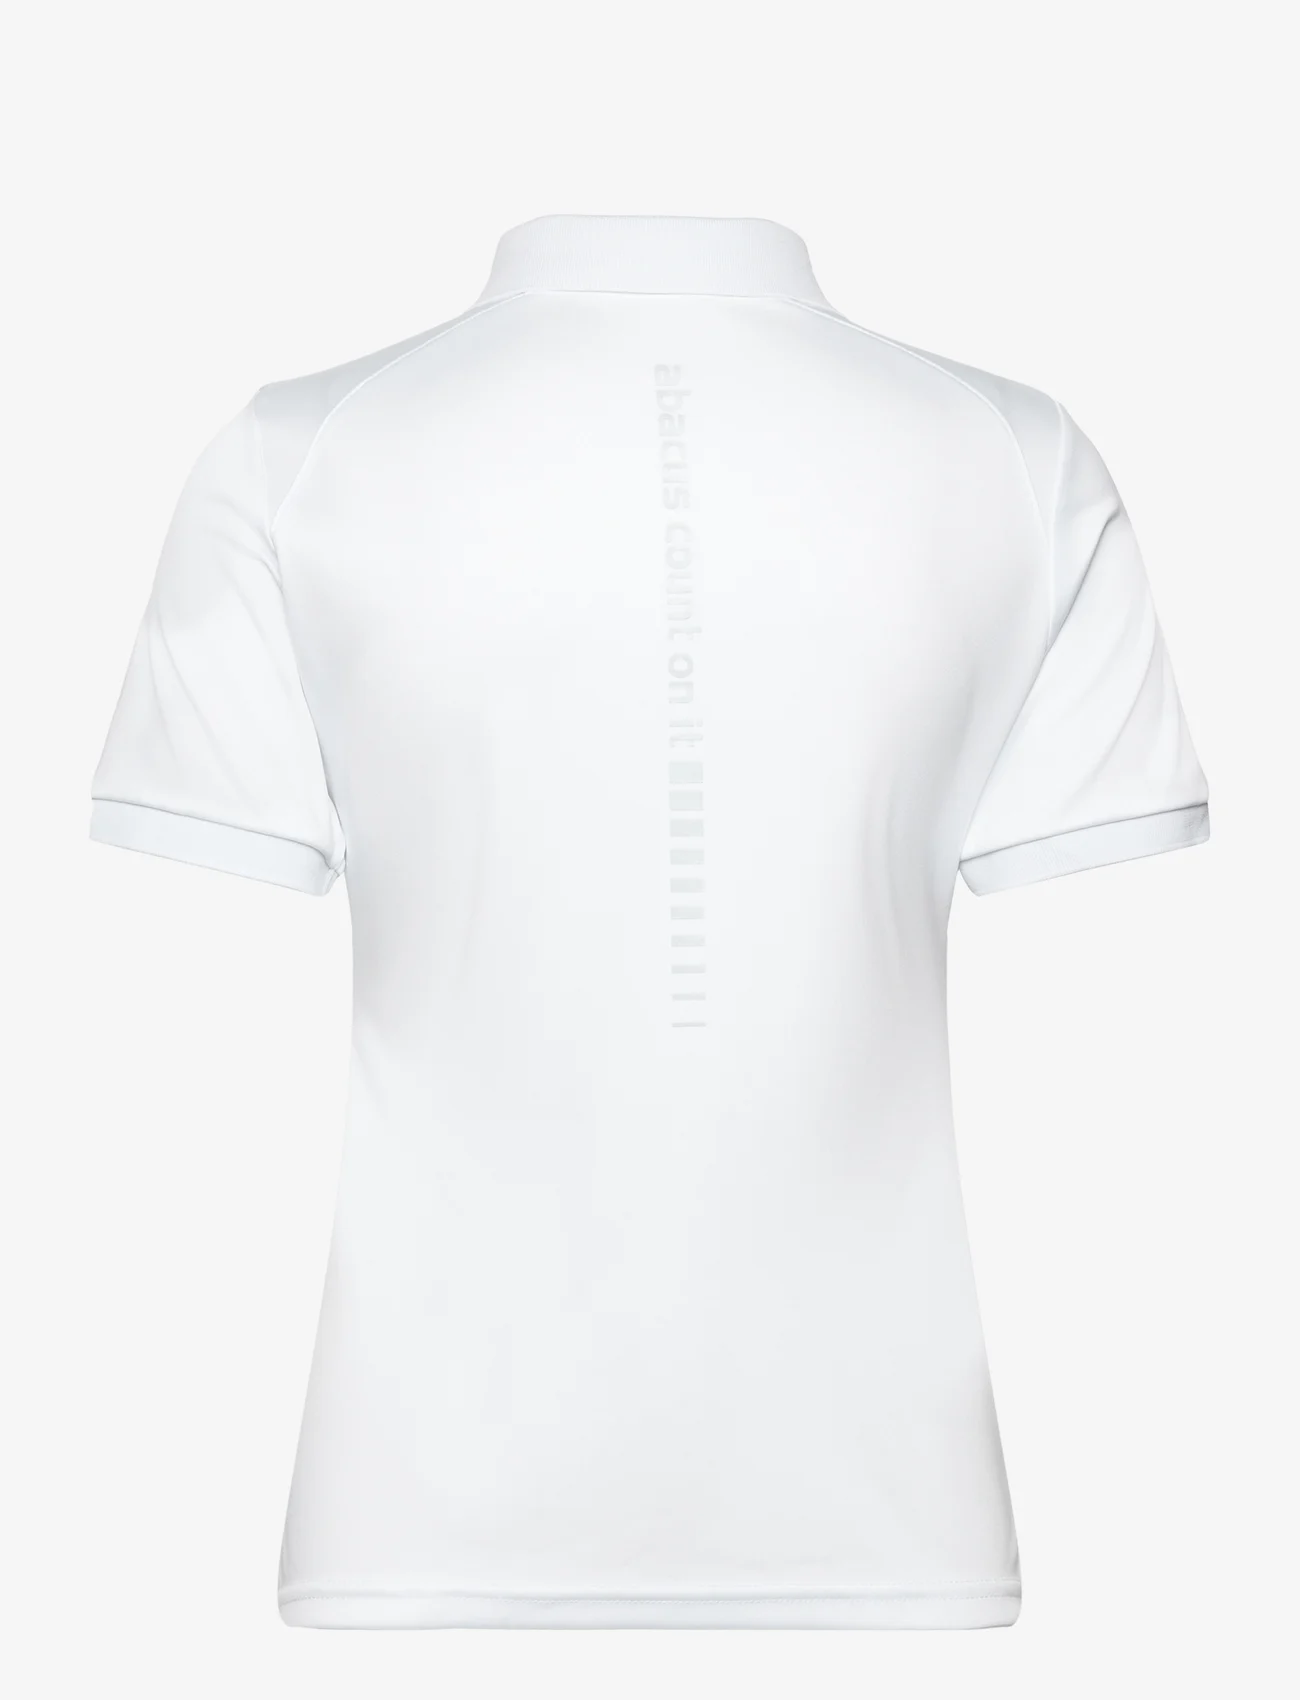 Abacus - Lds Hammel drycool polo - pikéer - white - 1